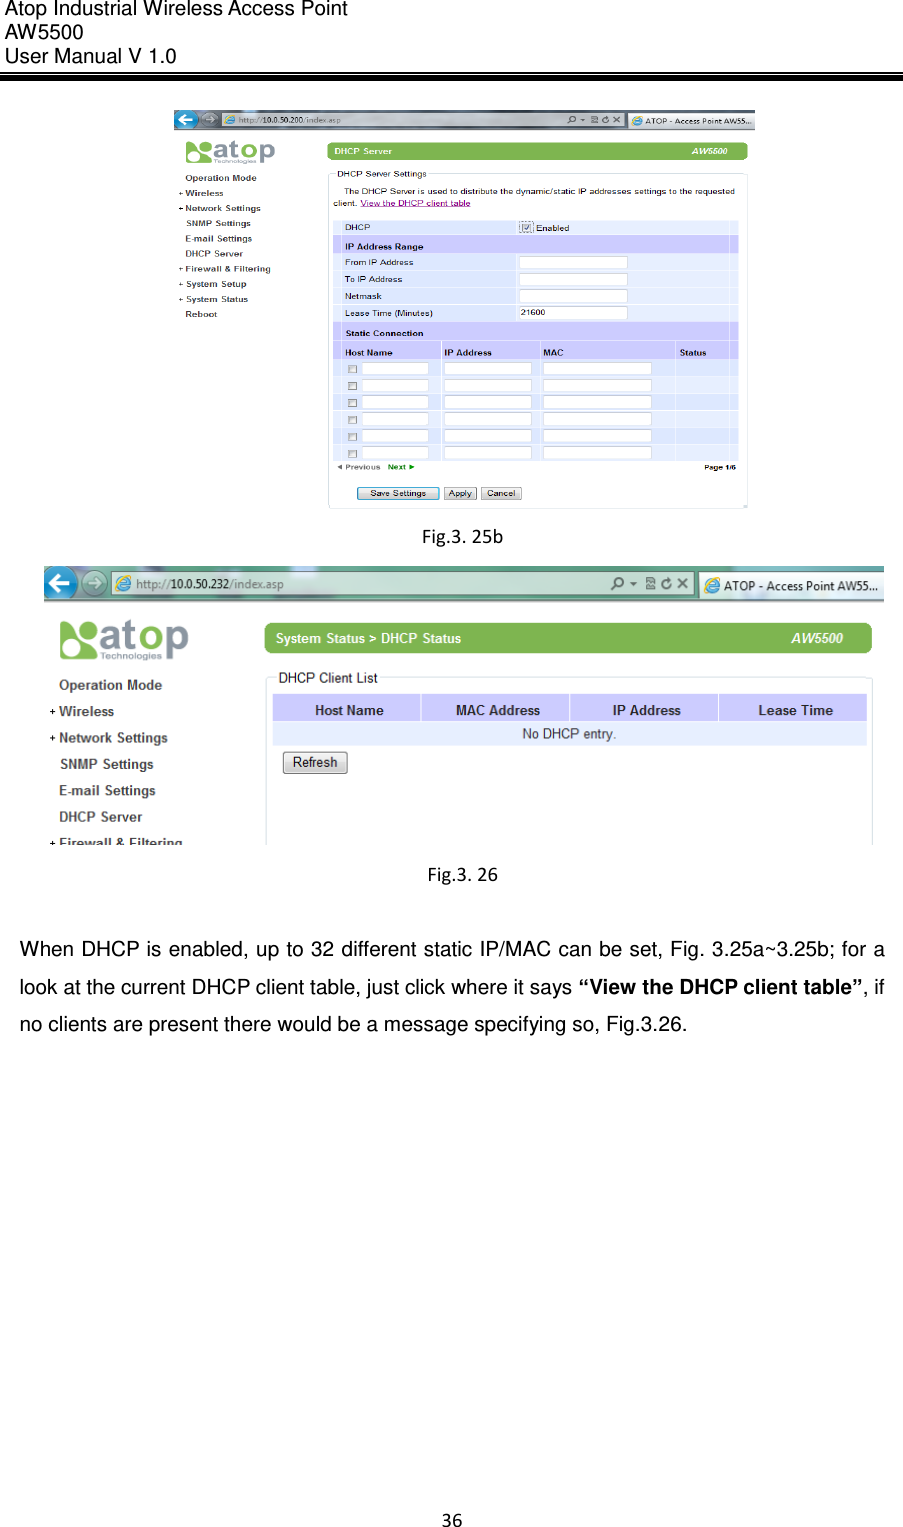 Atop Industrial Wireless Access Point AW 5500 User Manual V 1.0                      36   When DHCP is enabled, up to 32 different static IP/MAC can be set, Fig. 3.25a~3.25b; for a look at the current DHCP client table, just click where it says “View the DHCP client table”, if no clients are present there would be a message specifying so, Fig.3.26.      Fig.3. 25b  Fig.3. 26 